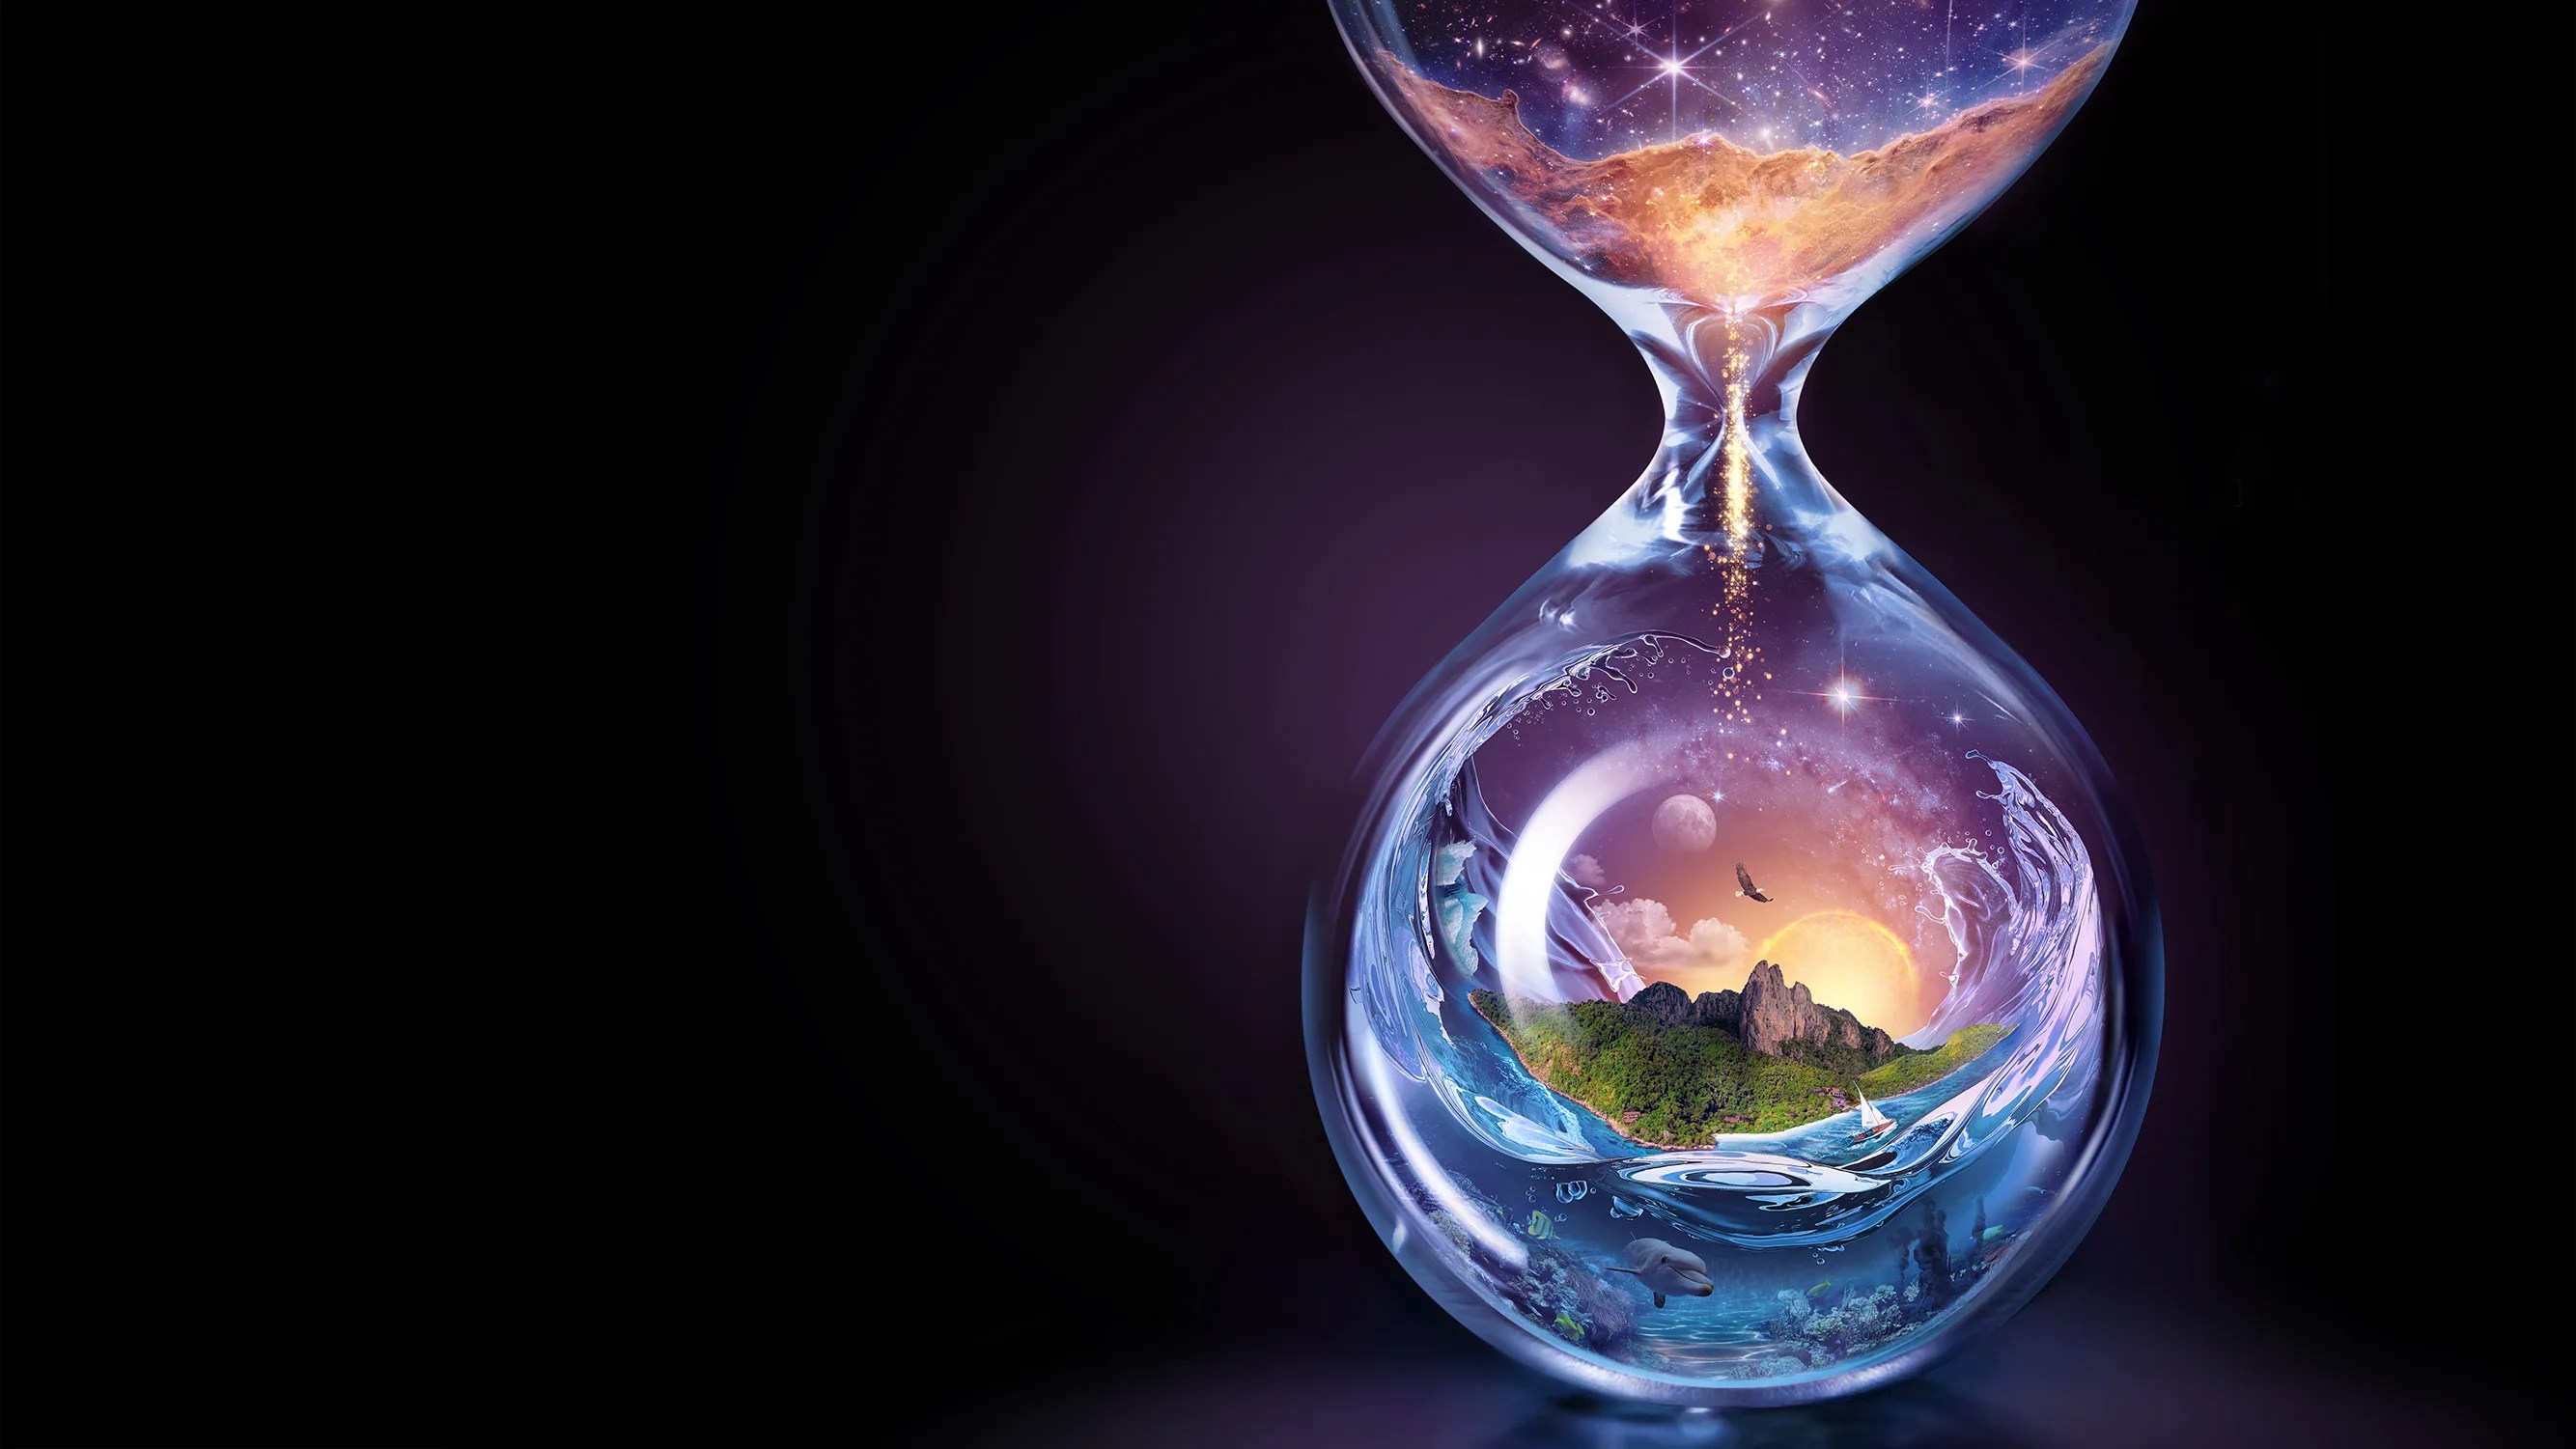 A beautiful graphic showing the Universe and the Earth inside an hourglass